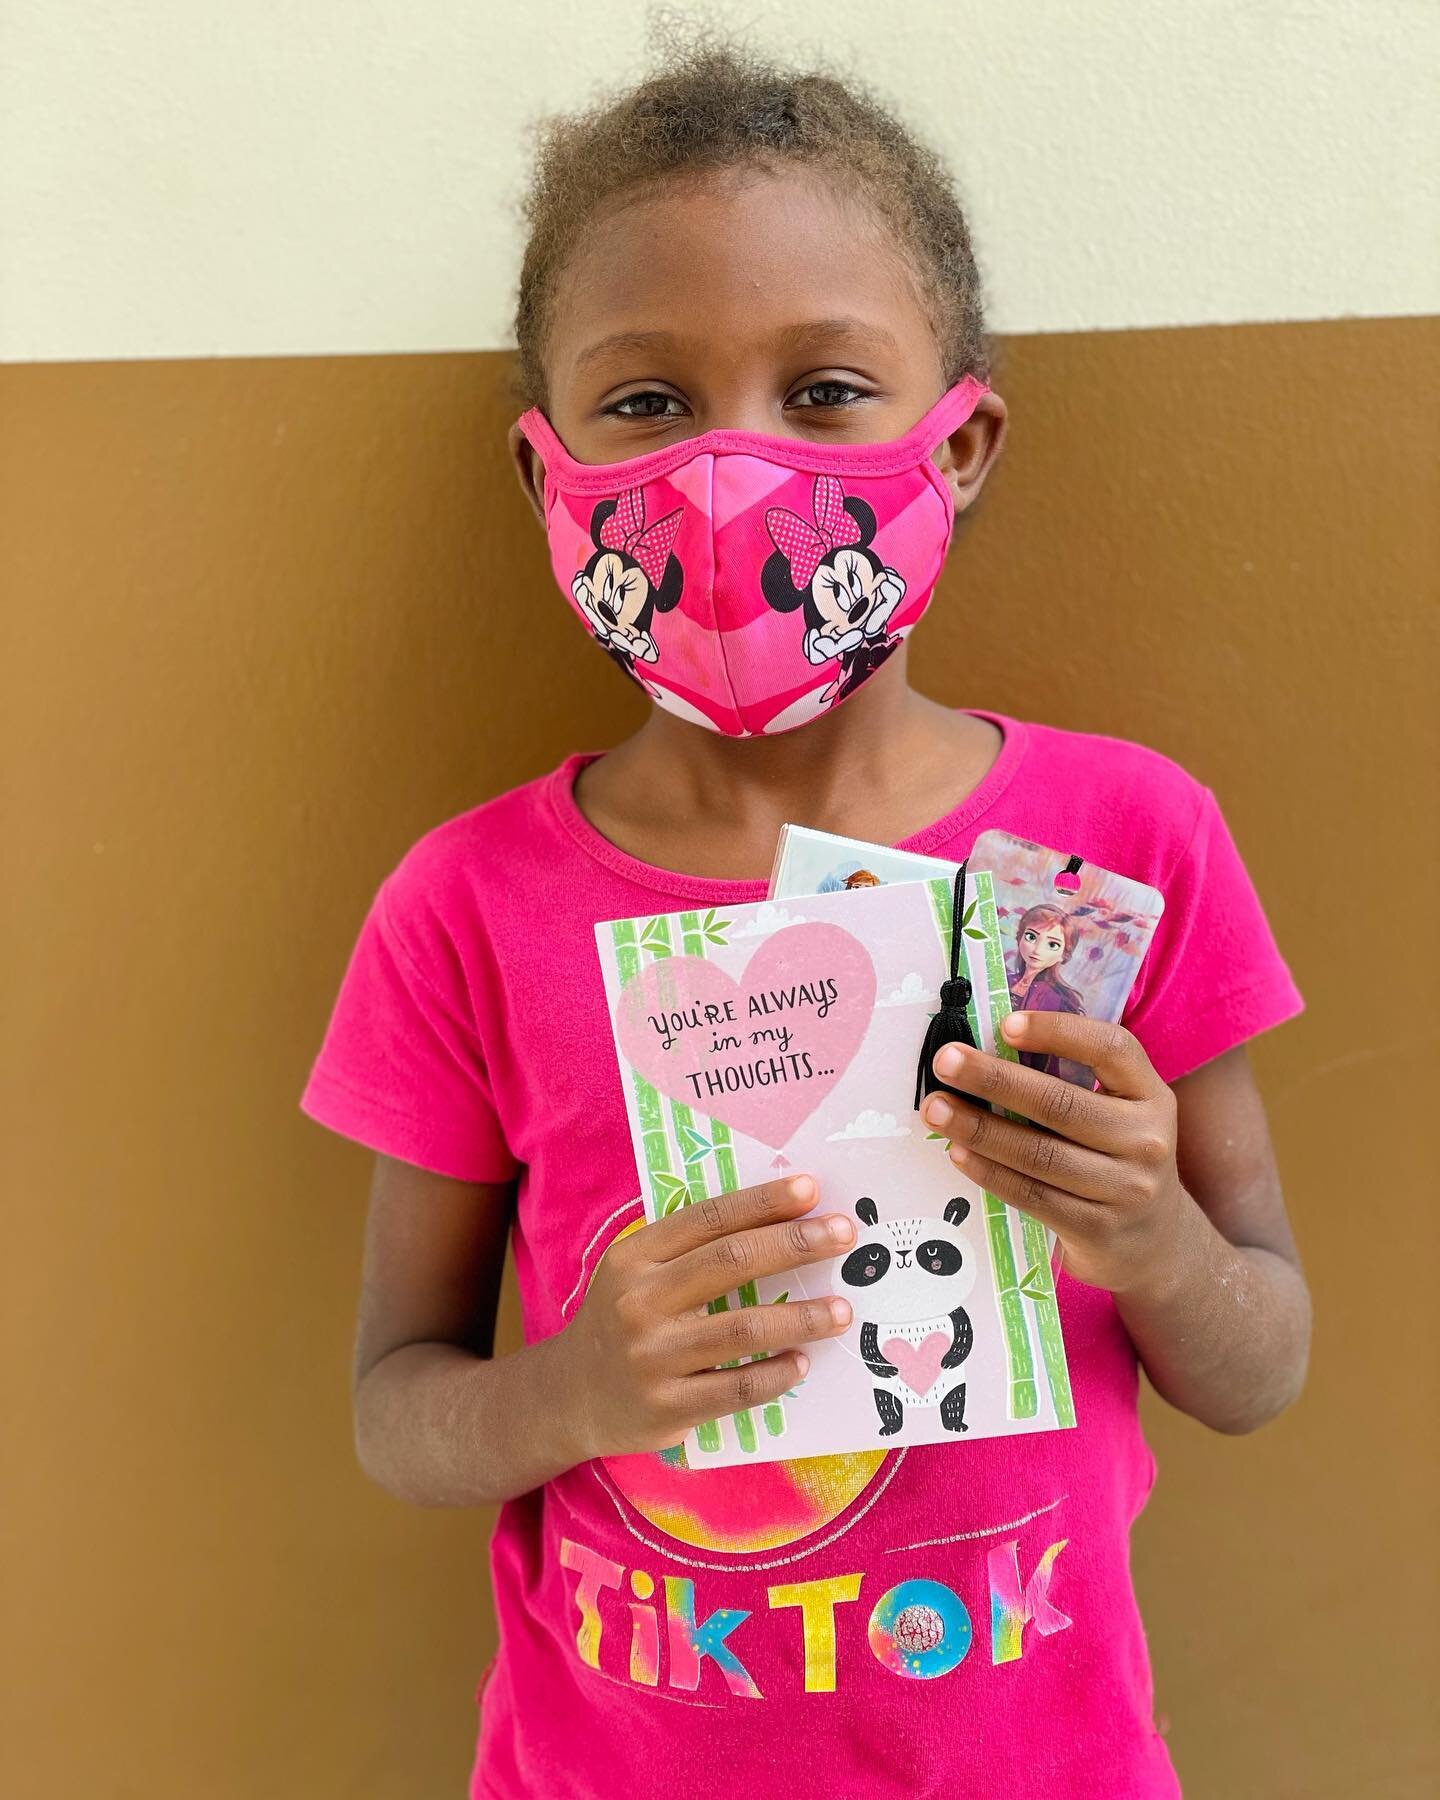 One of the major ways we fund our program is through child sponsorship. But our sponsors go above and beyond to make our kids feel special and cared for. Many of them send cards, gifts, and encouraging notes to let their sponsored child know they are